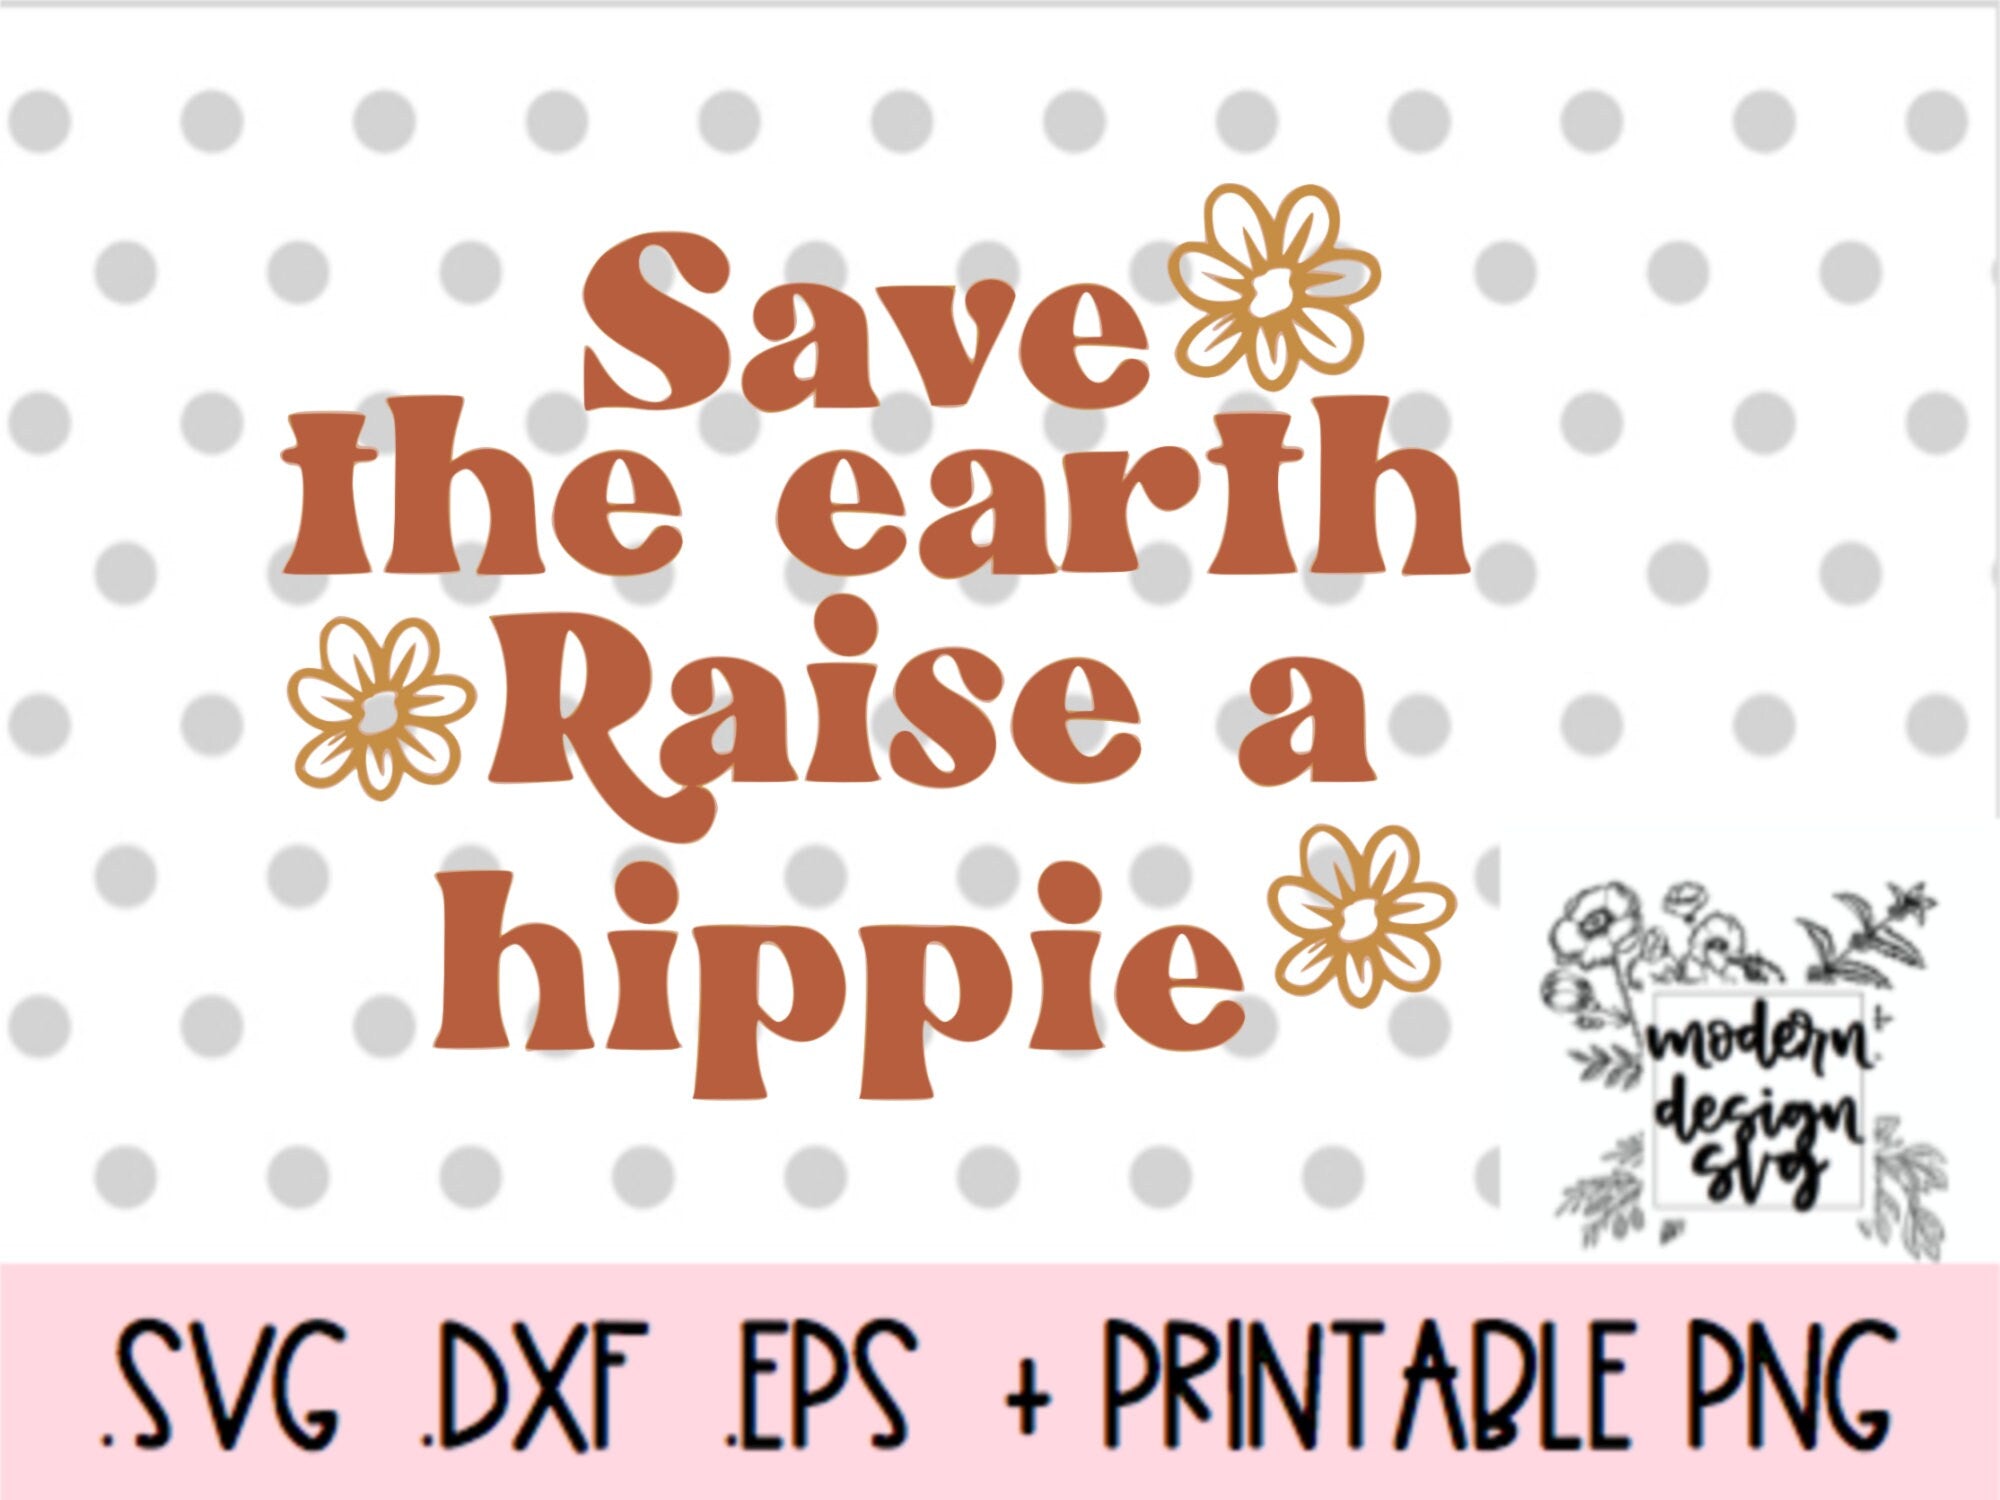 Save the Earth Raise a Hippie Retro Boho Vintage Spring Easter SVG Cut File DXF Printable PNG Silhouette CricutSublimation